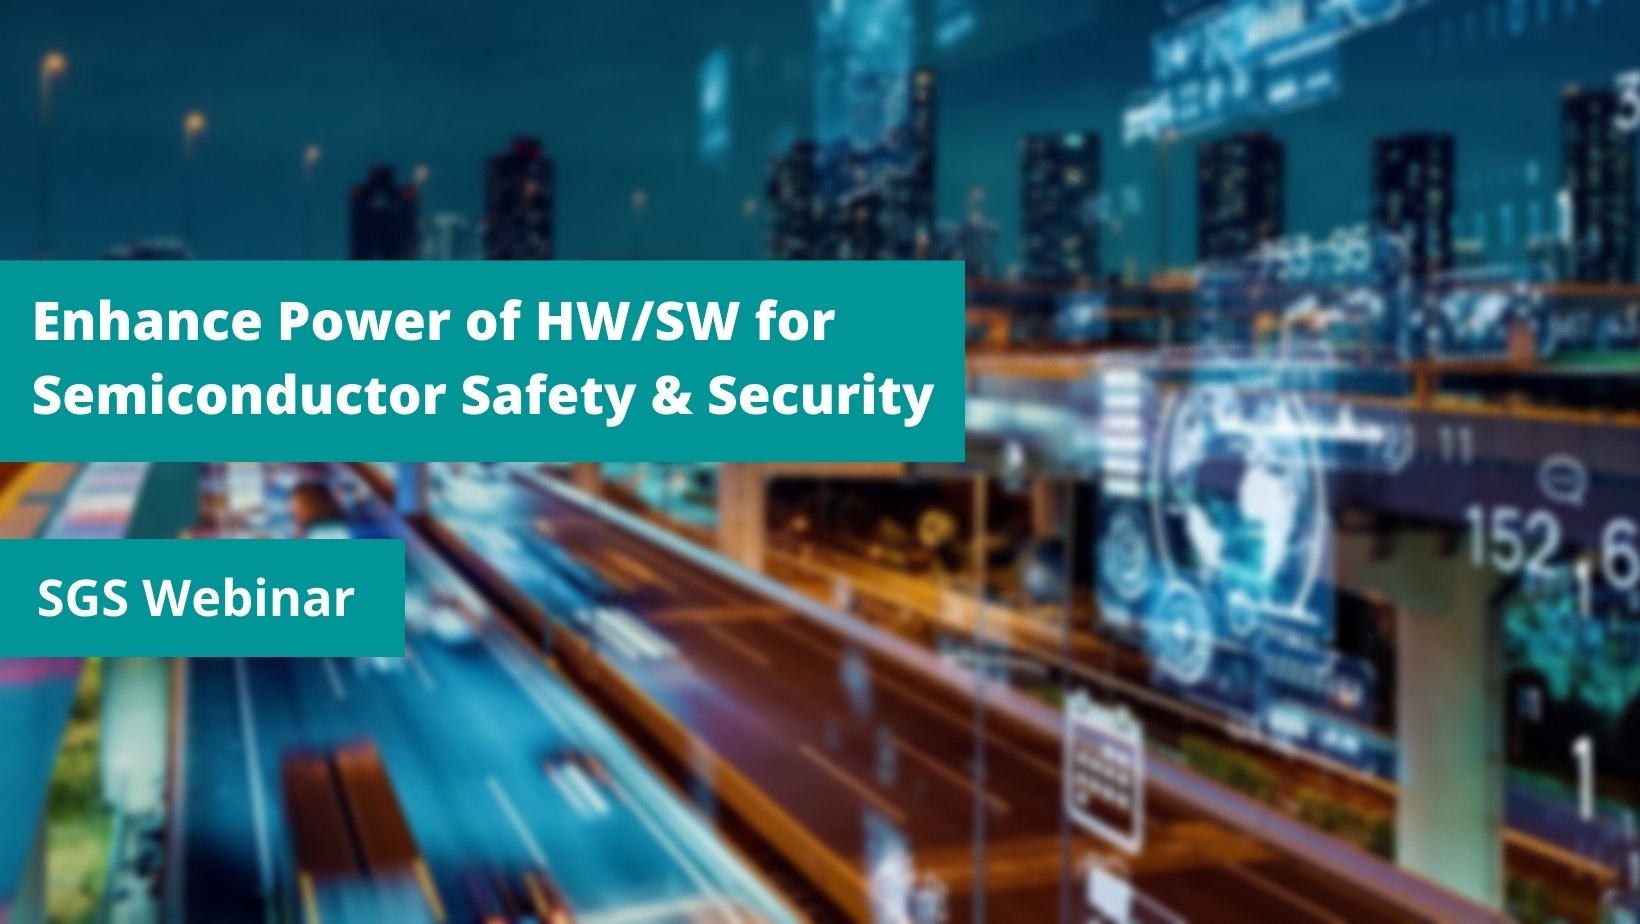 Enhance Power of HW/SW for Semiconductor Safety &#038; Security | MIH x SGS Seminar Summary